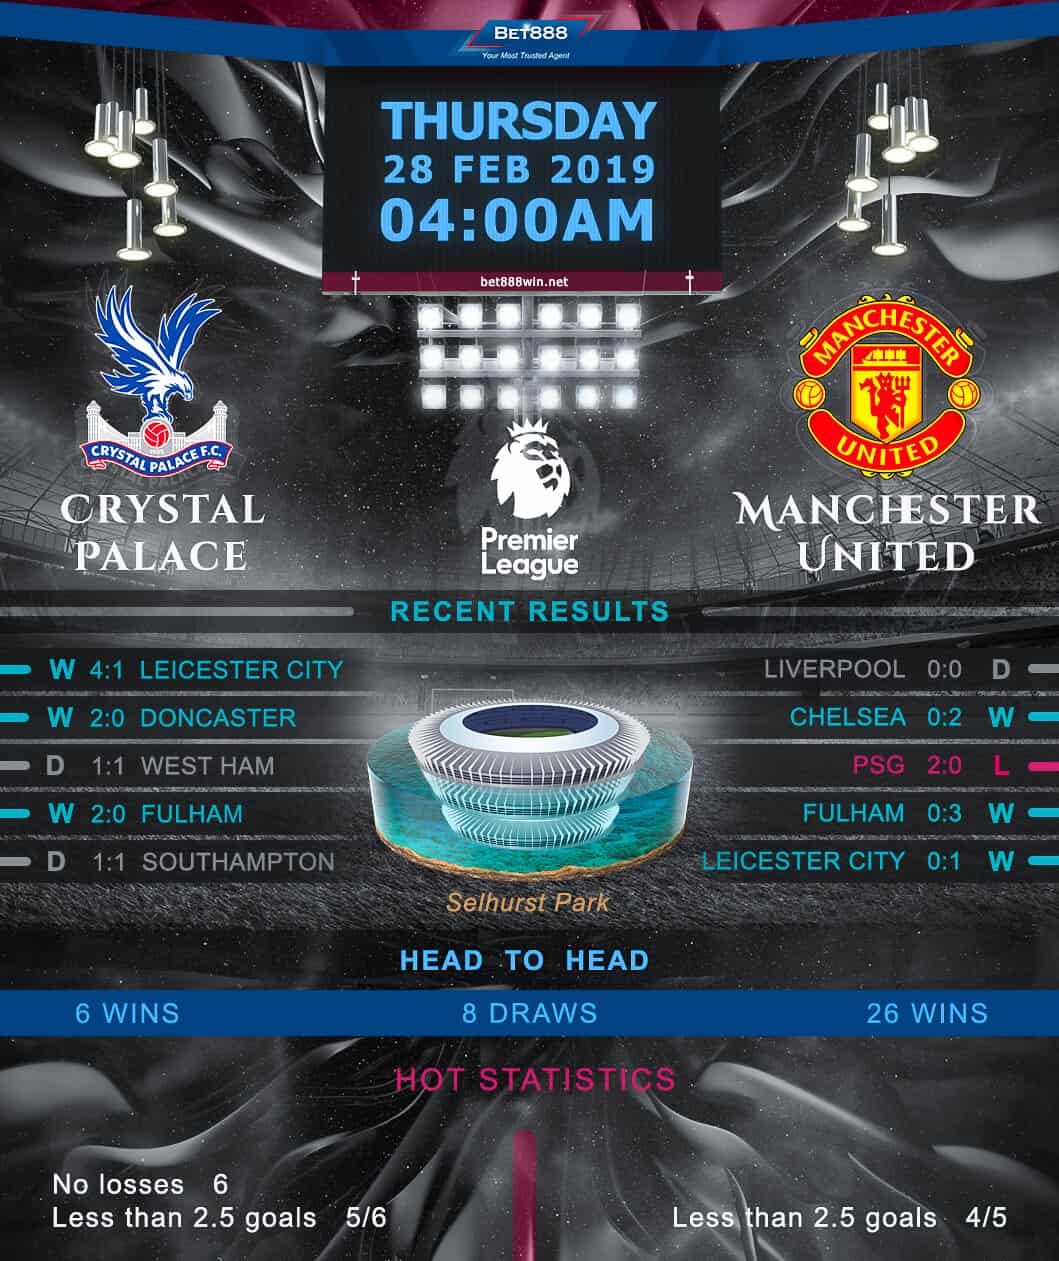 Crystal Palace vs Manchester United 28/02/19